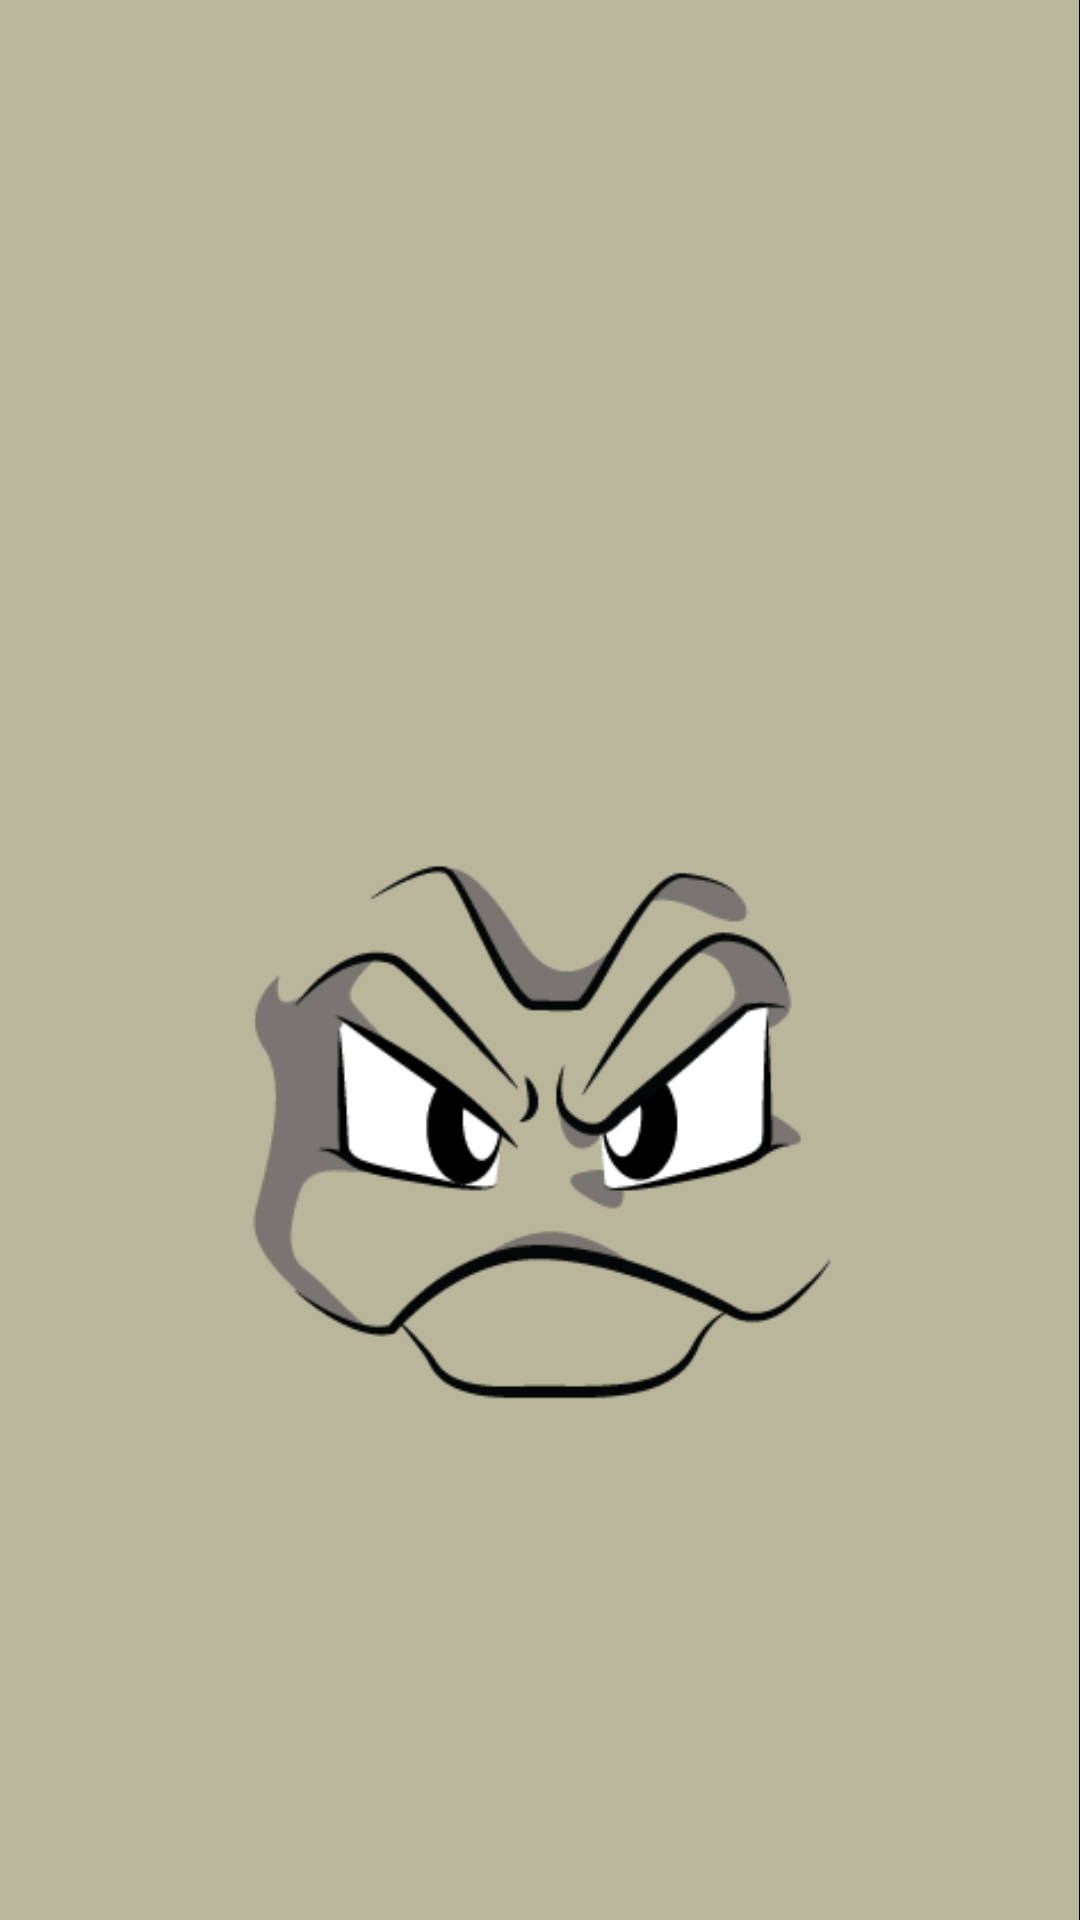 Geodude Face On Gray Background Wallpaper